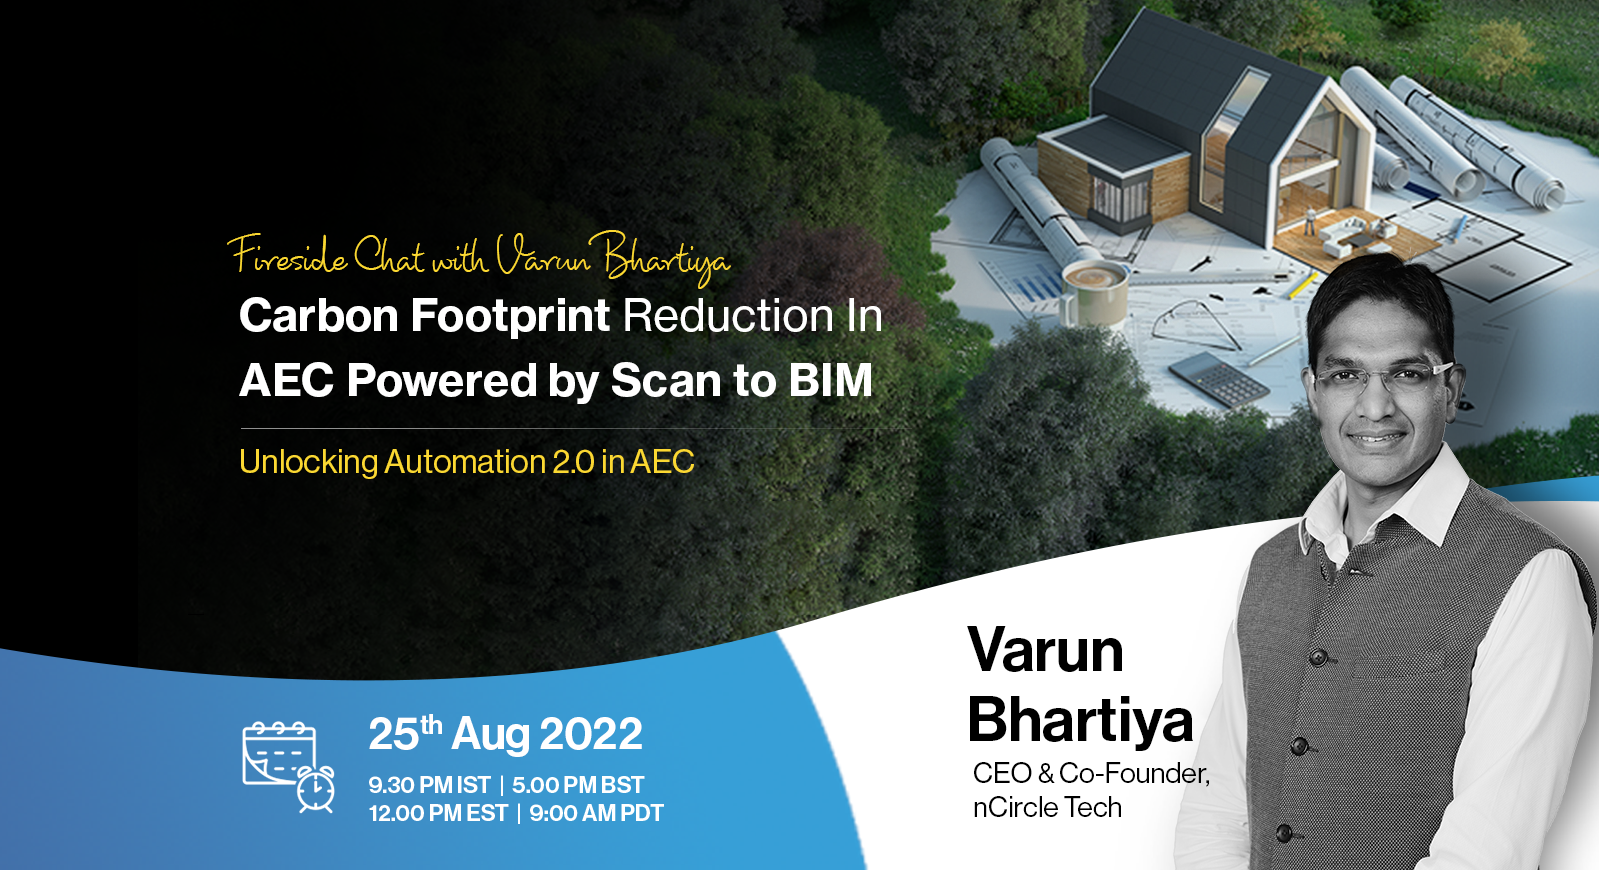 Carbon Footprint Reduction In AEC Powered by Scan to BIM – Unlocking Automation 2.0 in AEC